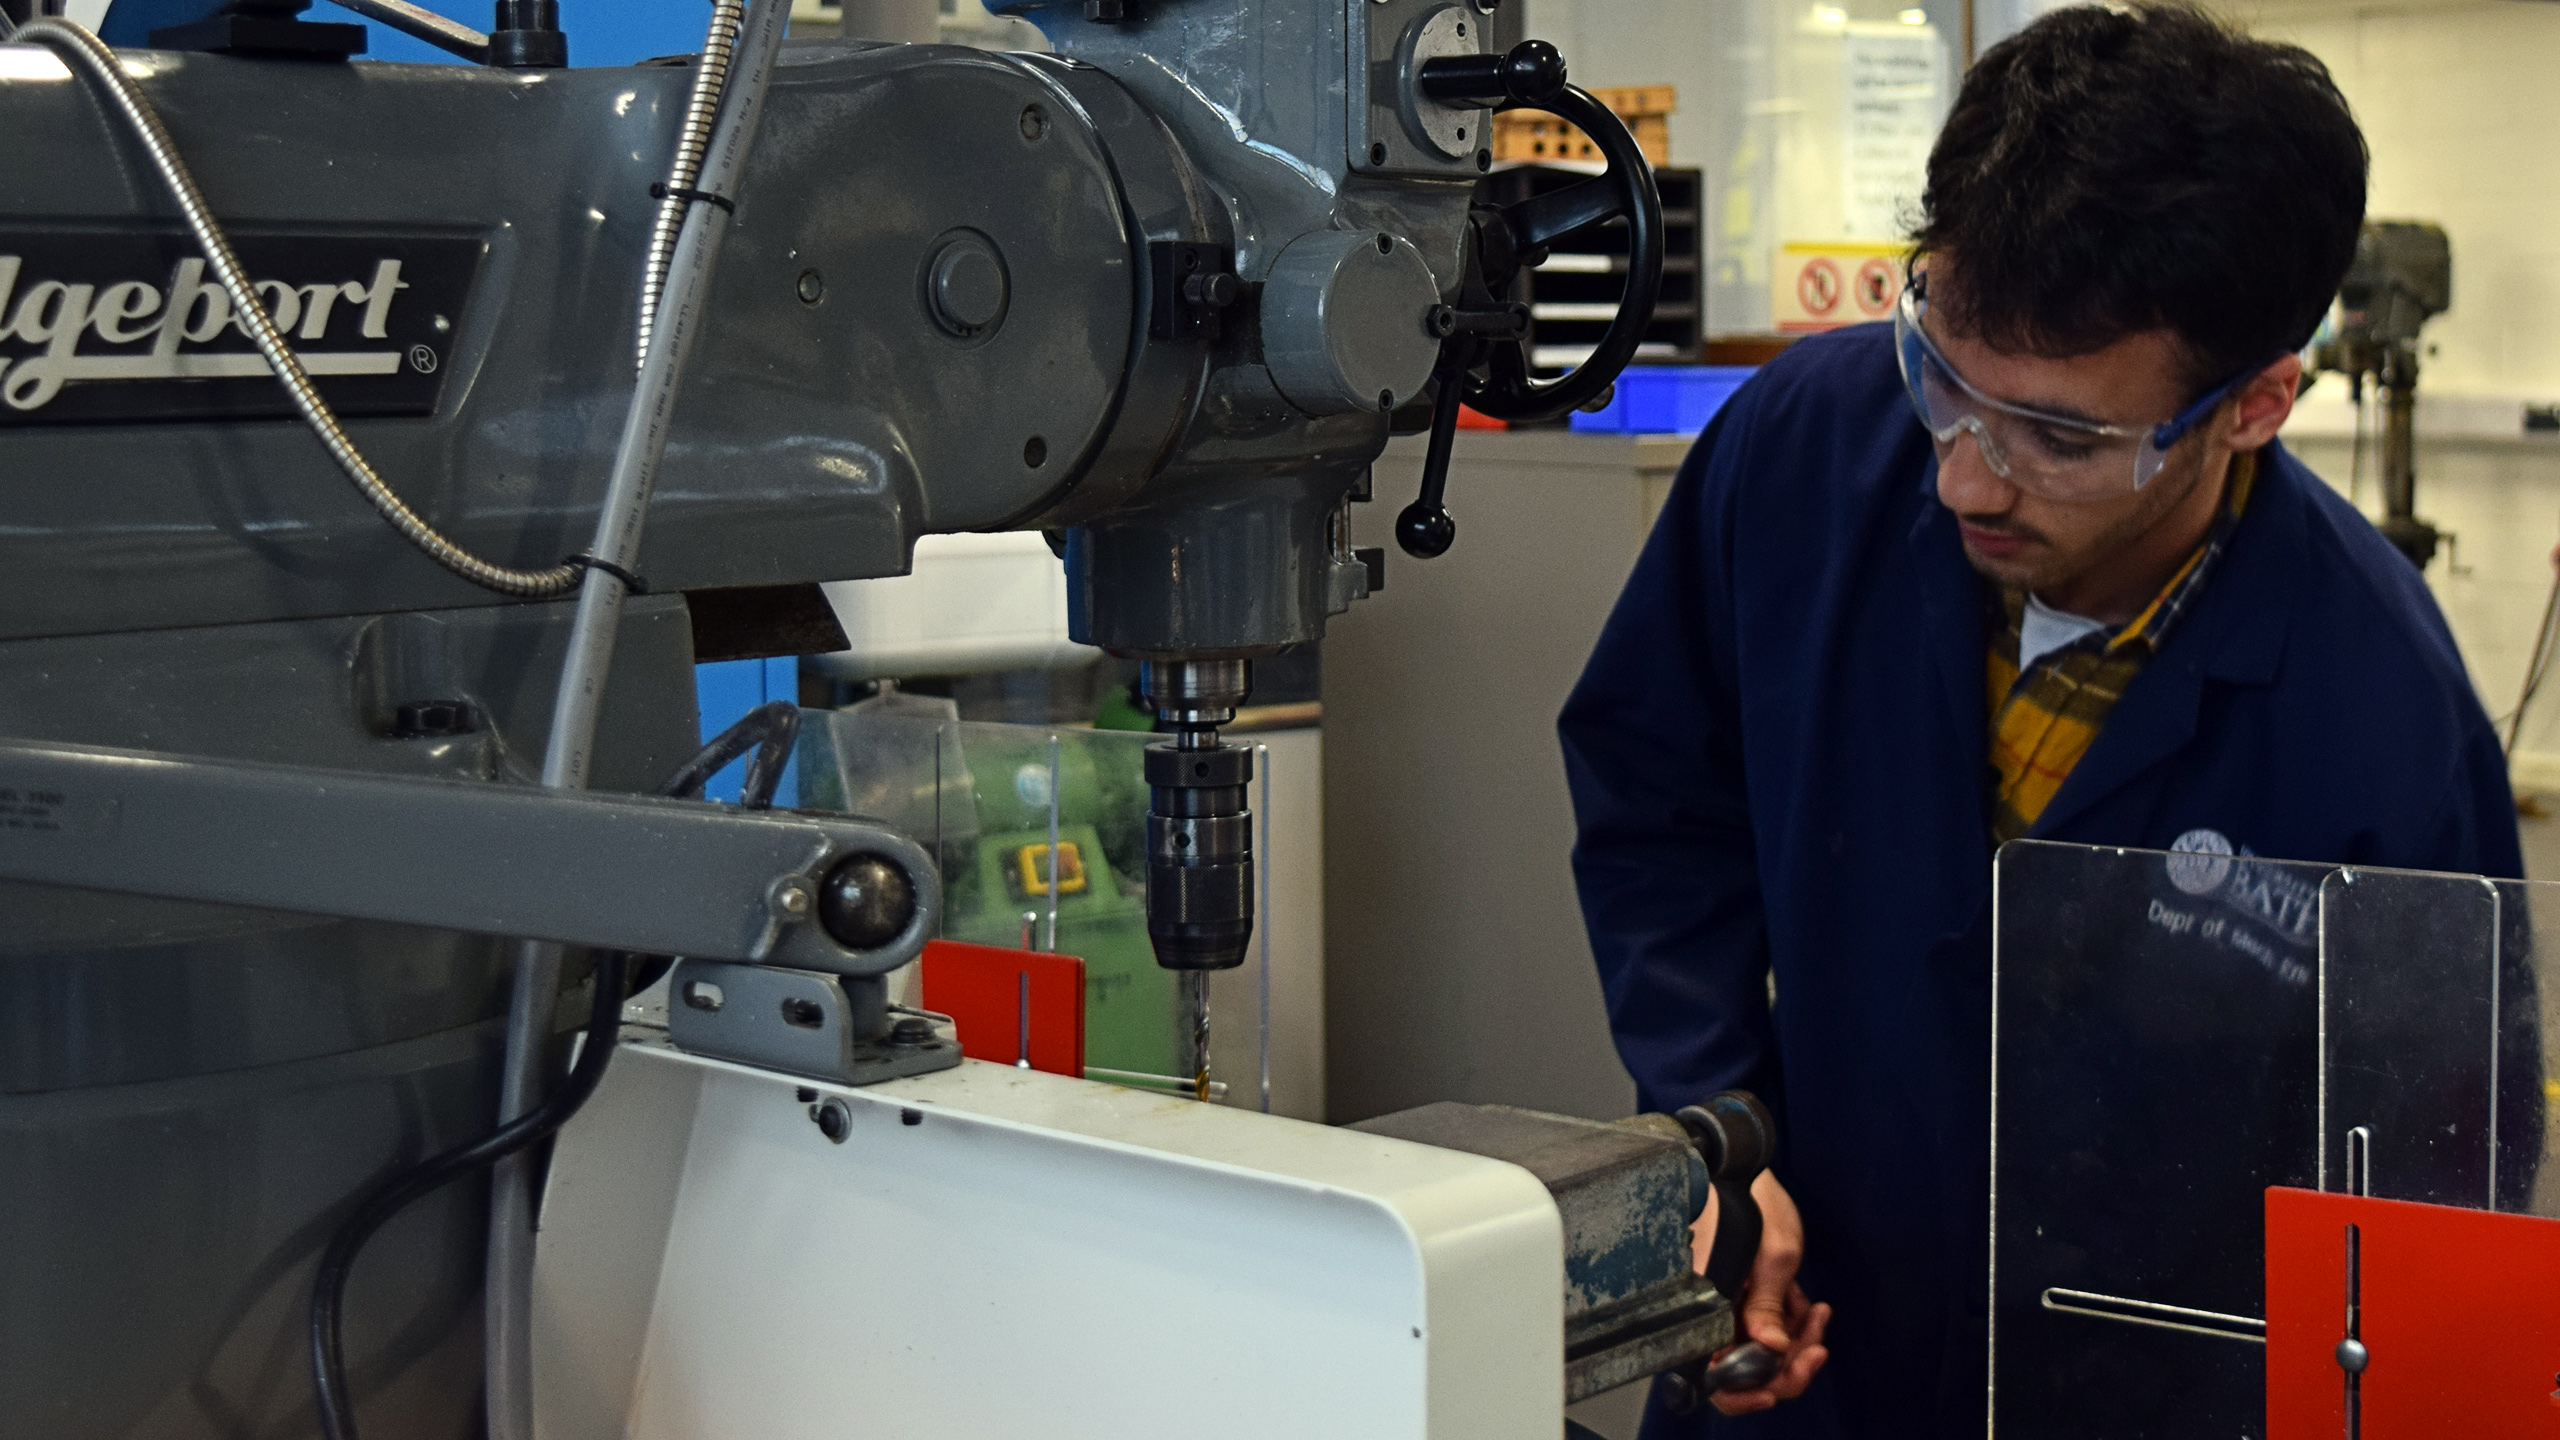 Student in lab coat and goggles works on CNC milling machine in workshop